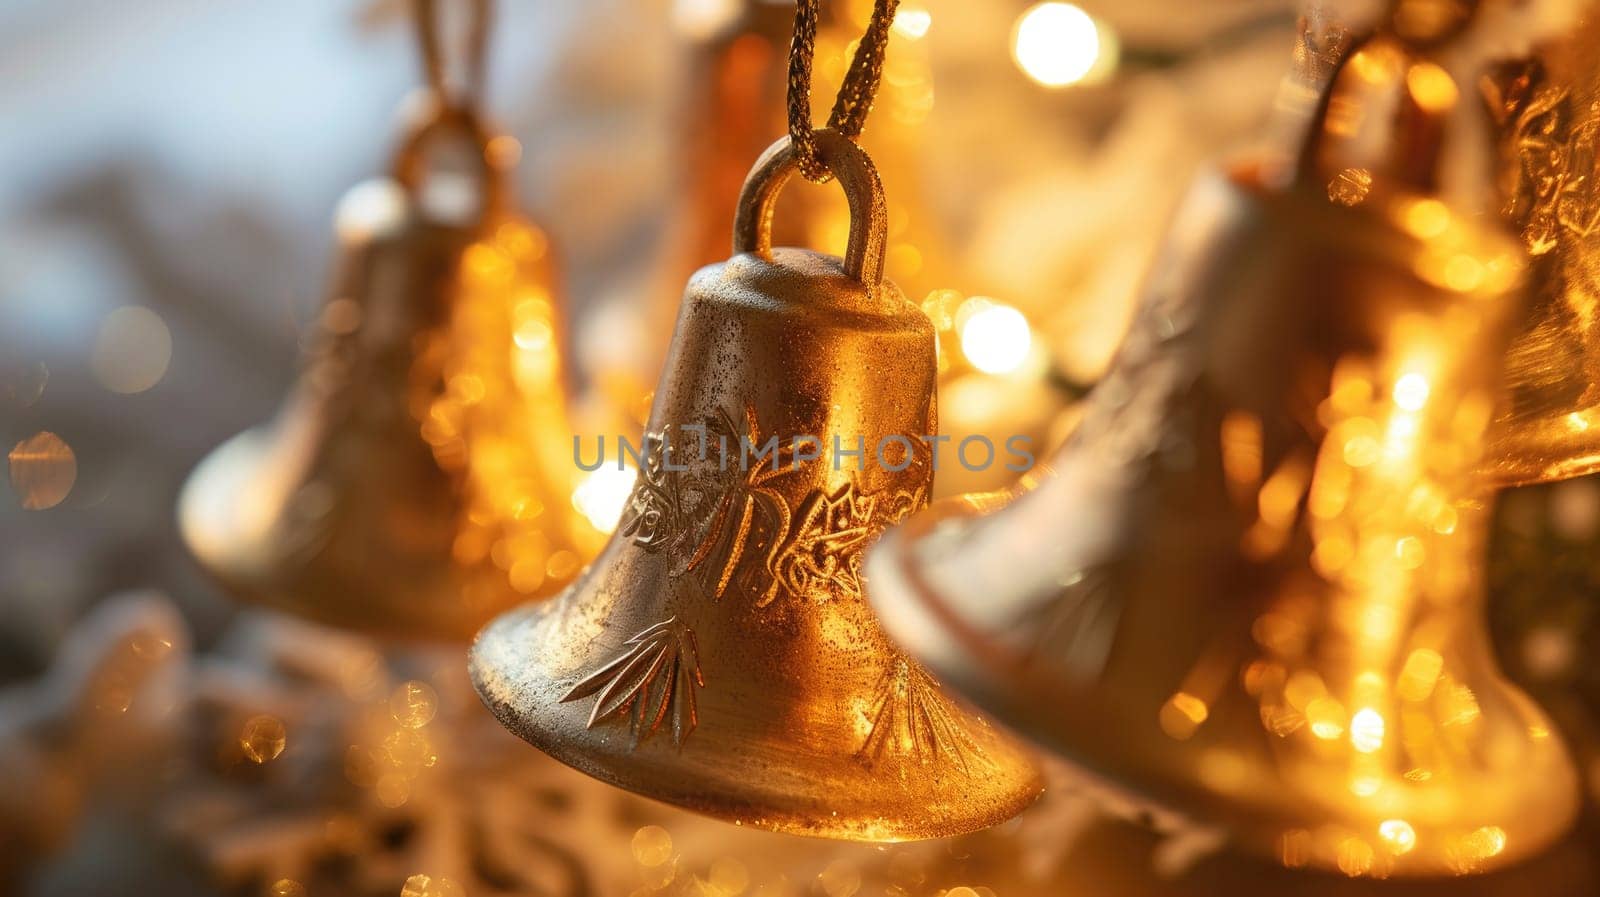 Golden bells create a festive mood on a Christmas tree decorated with a garland by Yurich32